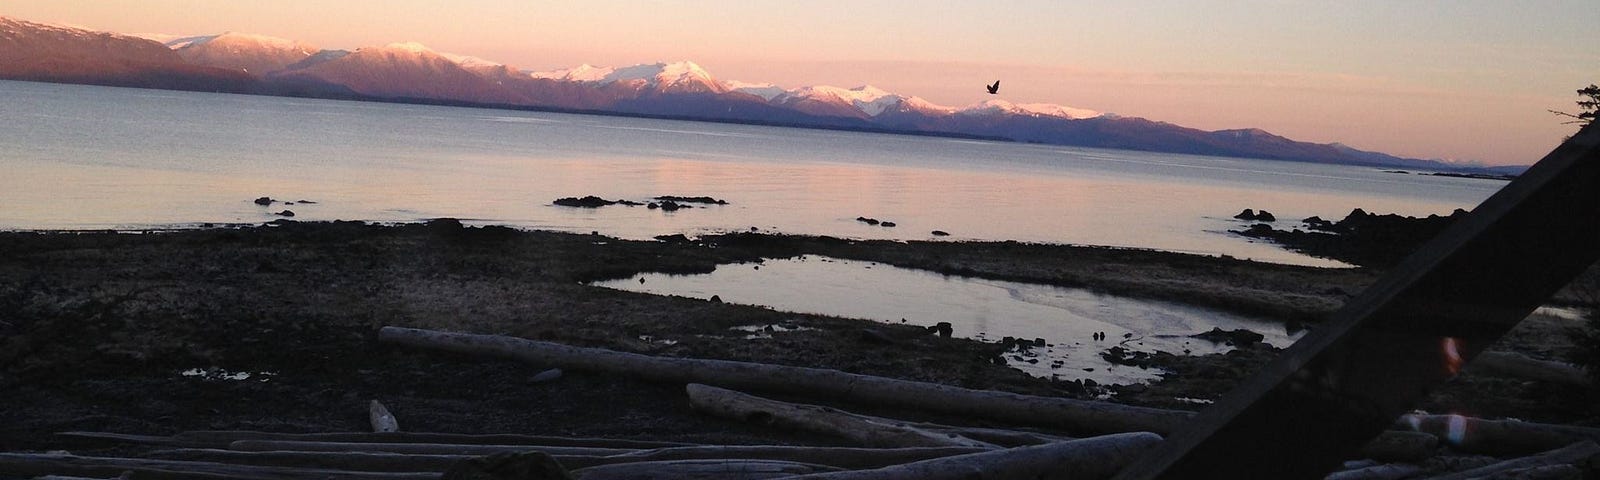 A view of the beach in a bay with mountains in the background. Coffman Cove, Alaska